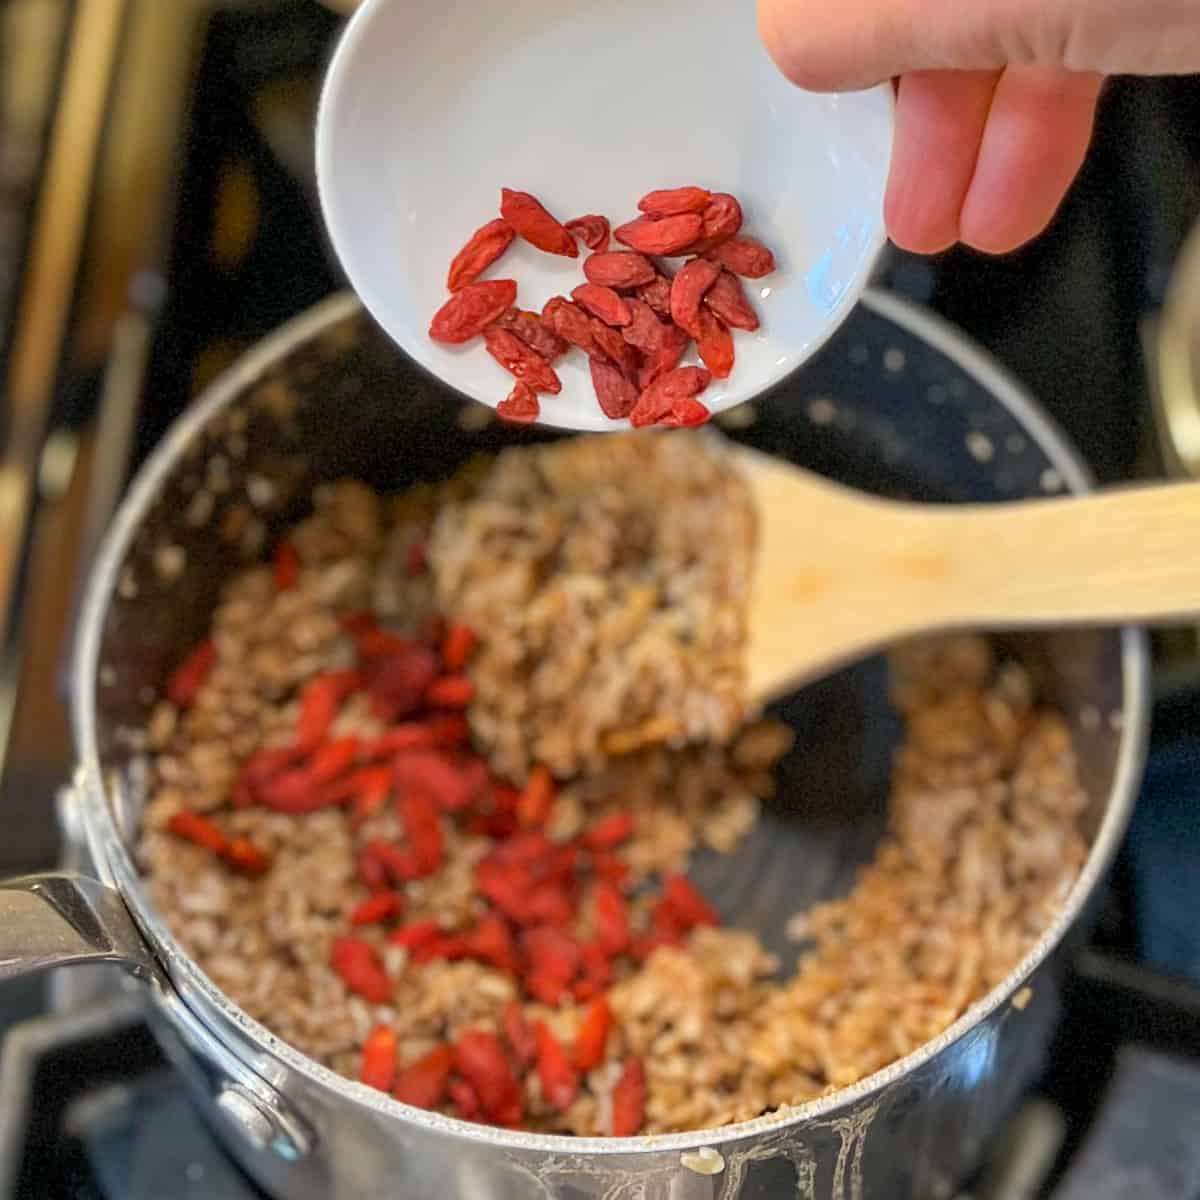 bright red goji berries being added to the pot of cooked oats